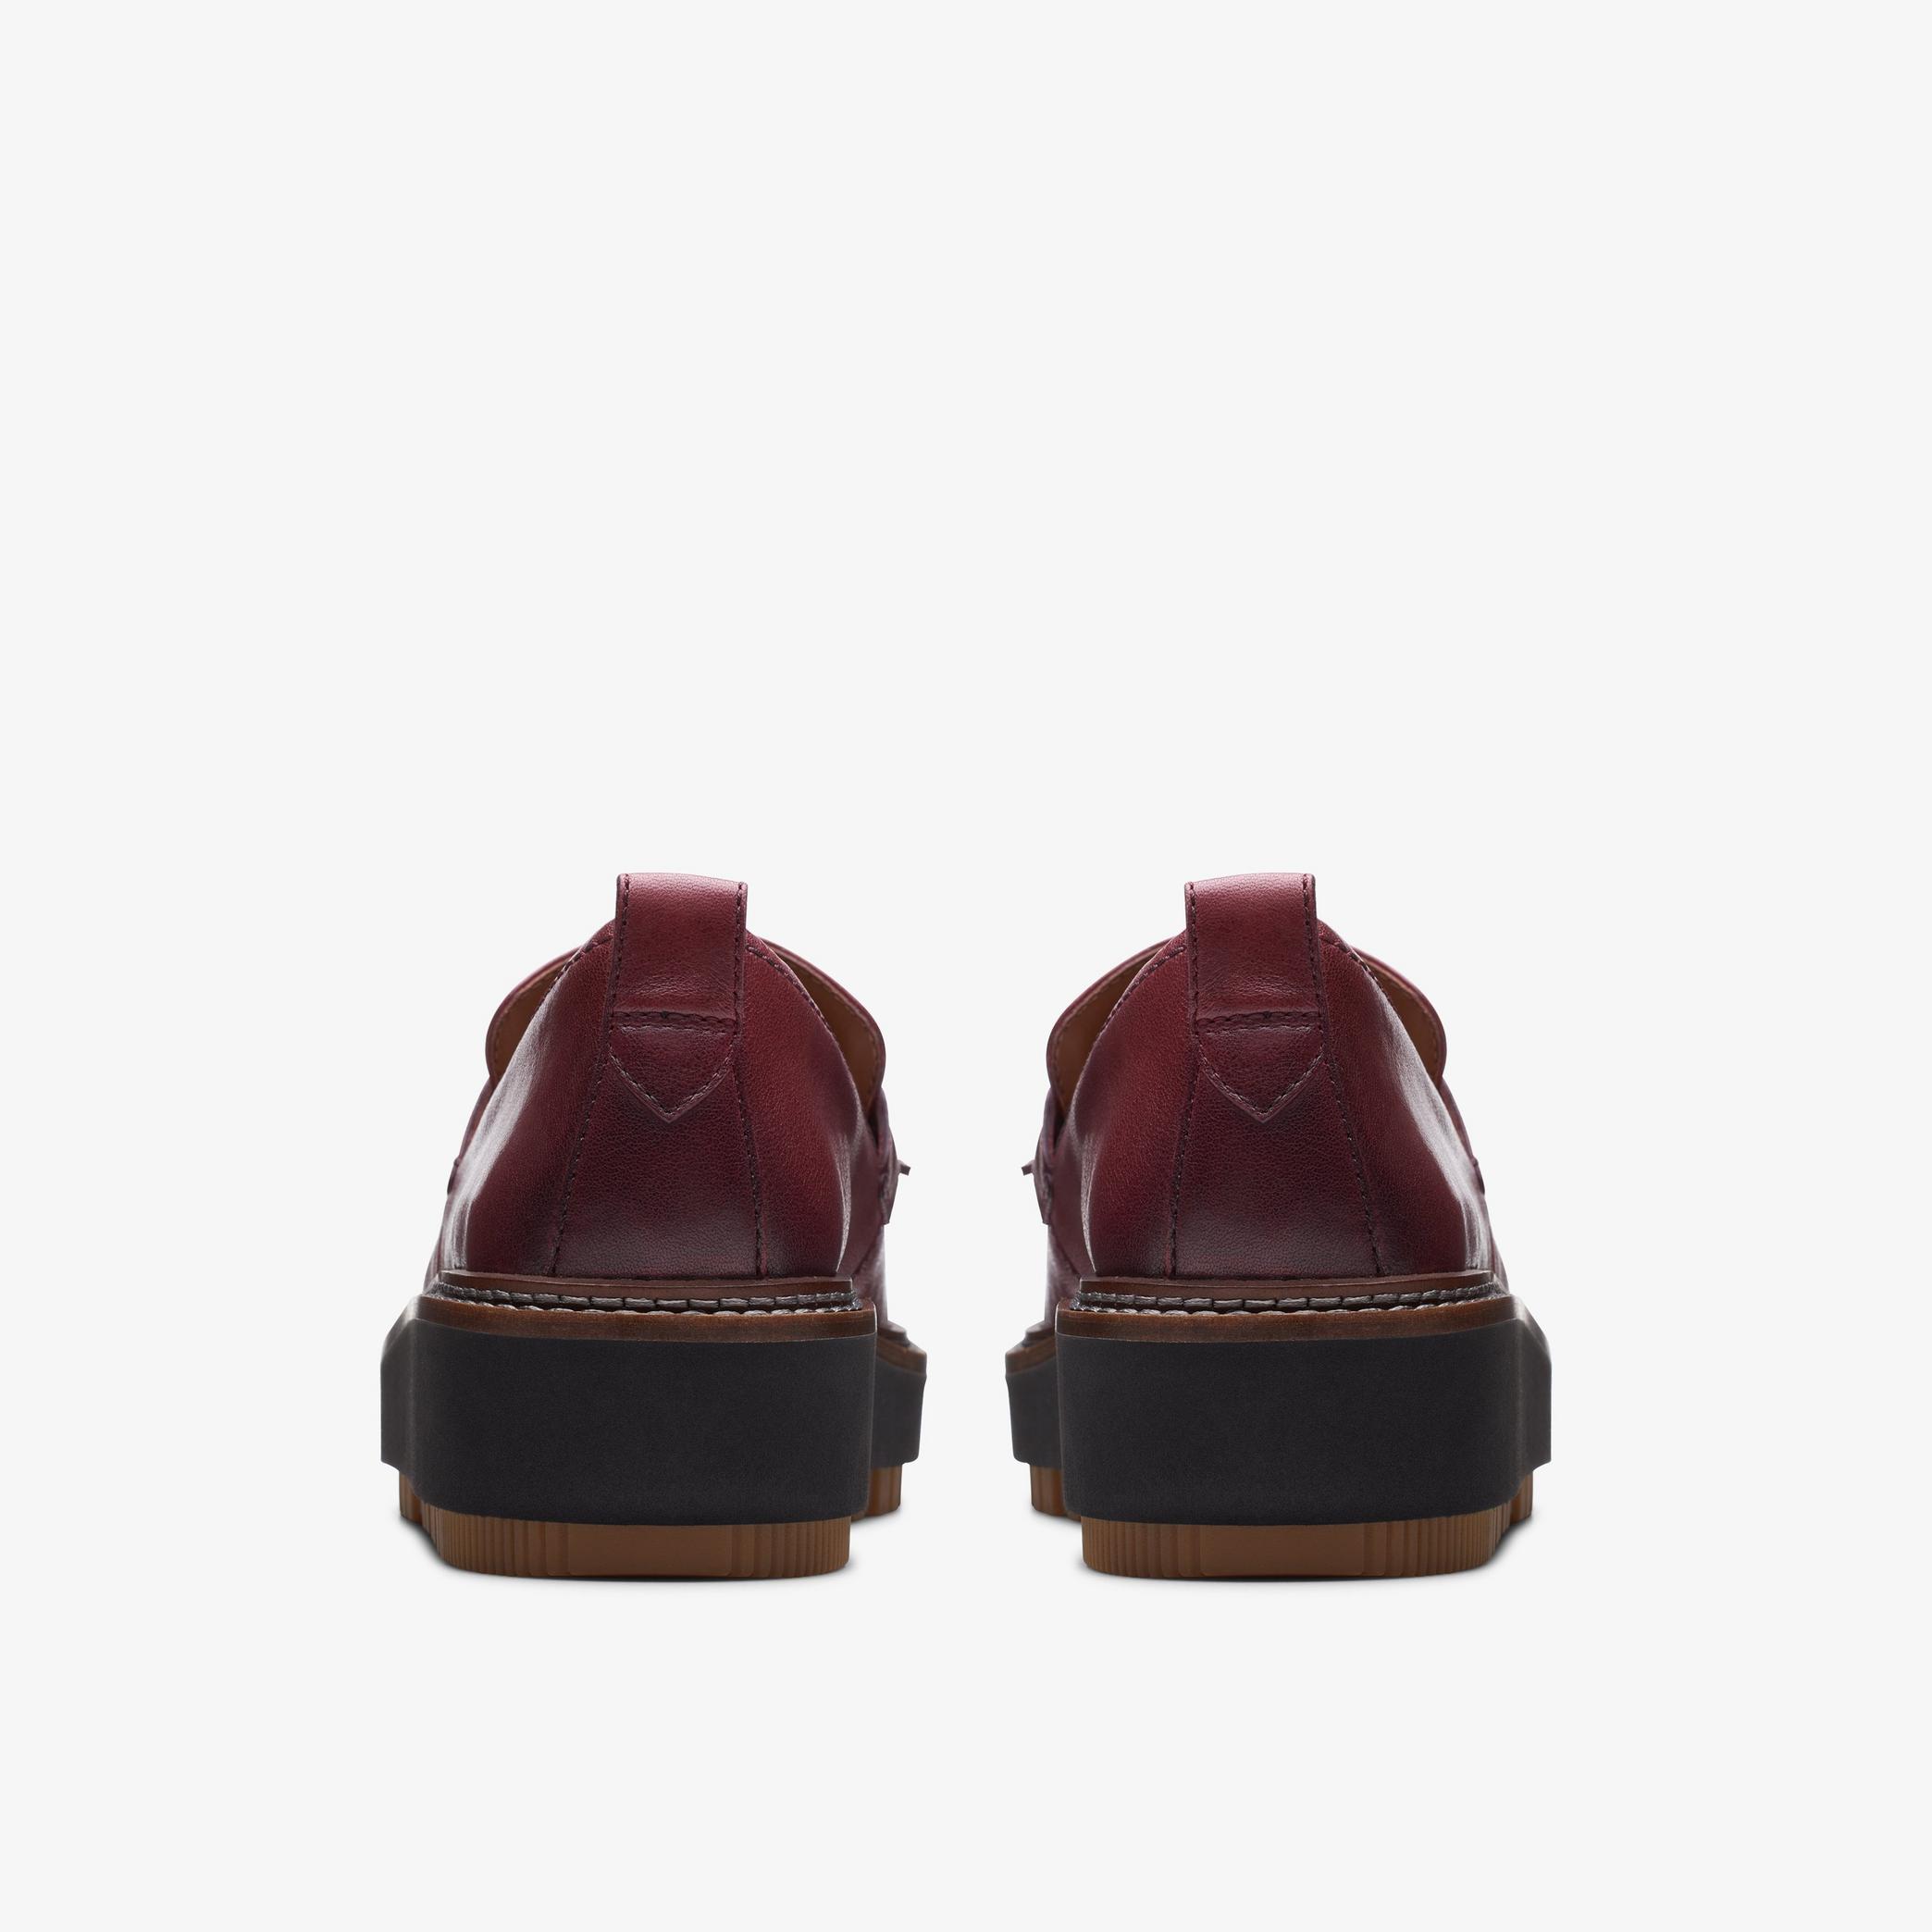 Orianna Loafer Burgundy Leather Loafers, view 6 of 7